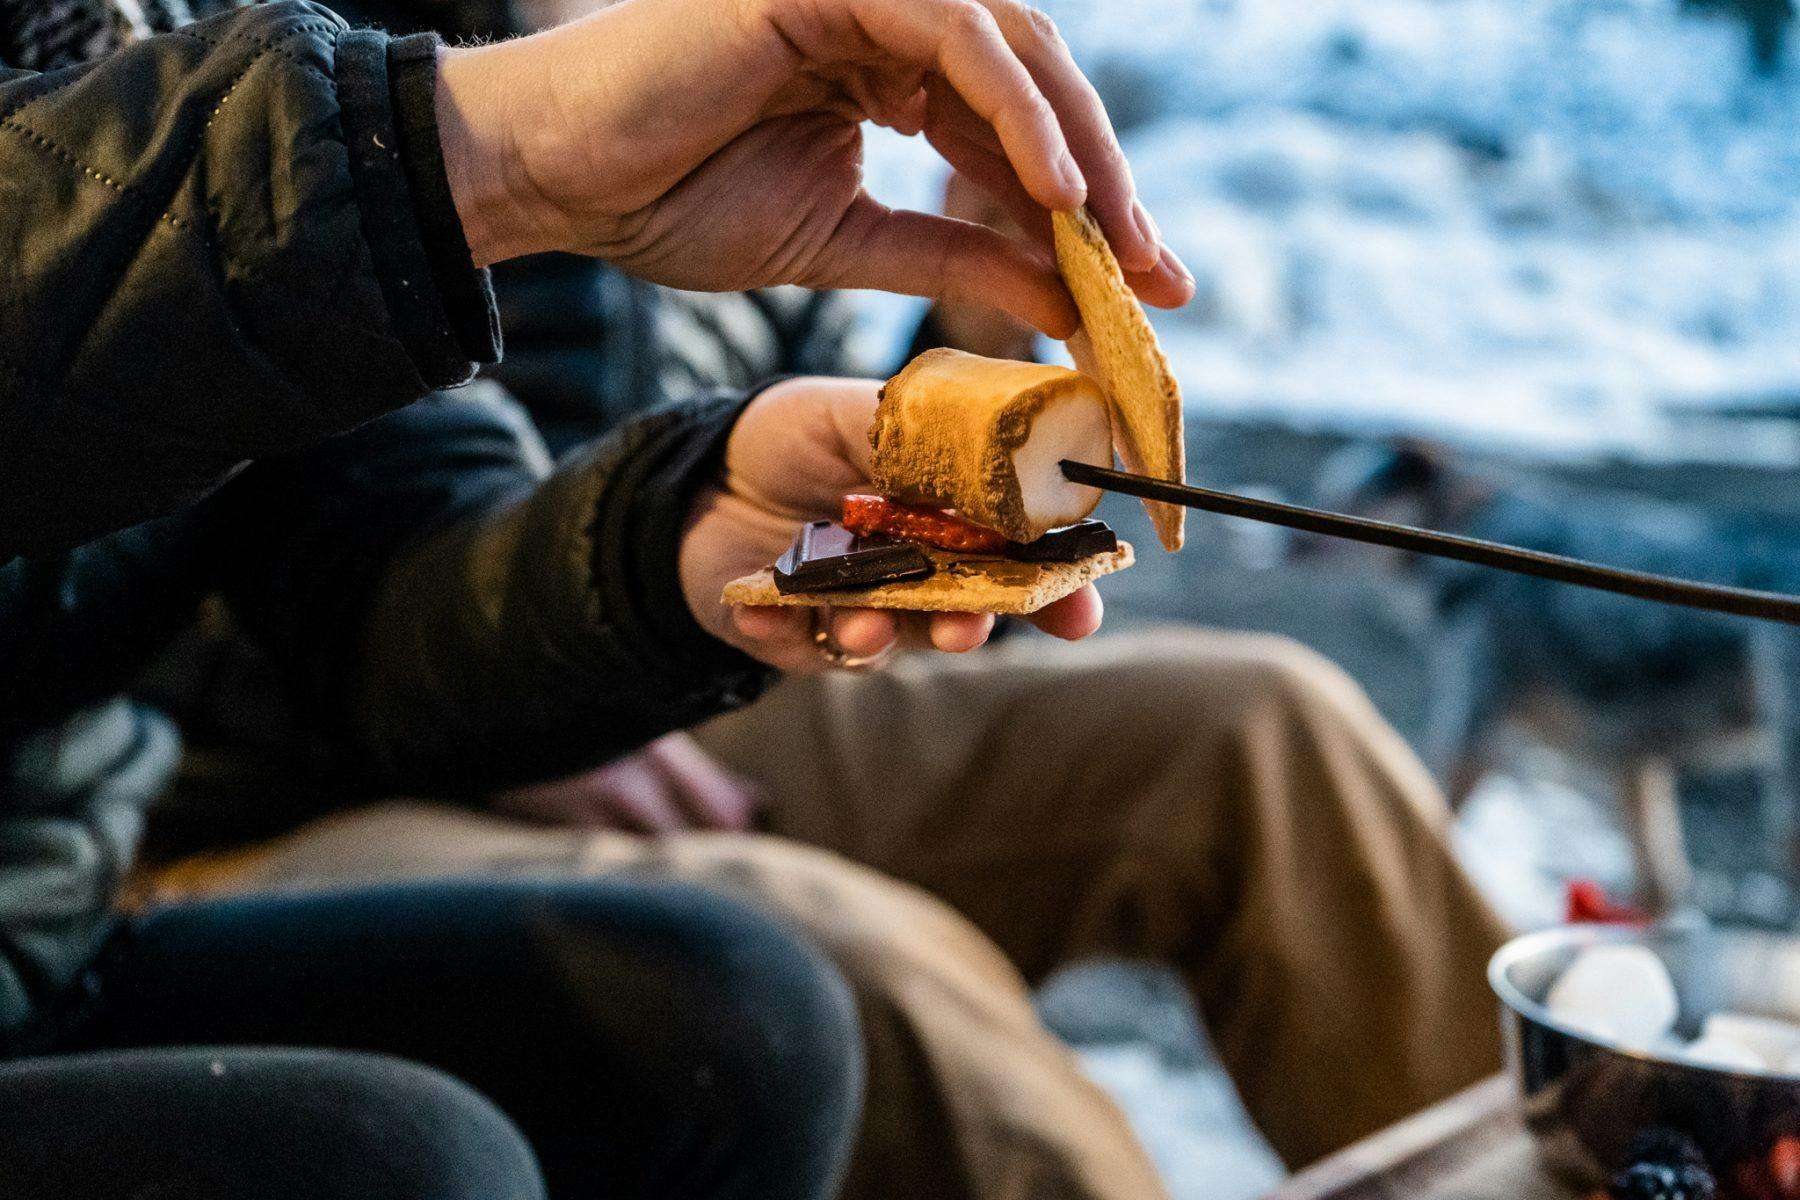 A woman squishing a smore into place around a campfire.